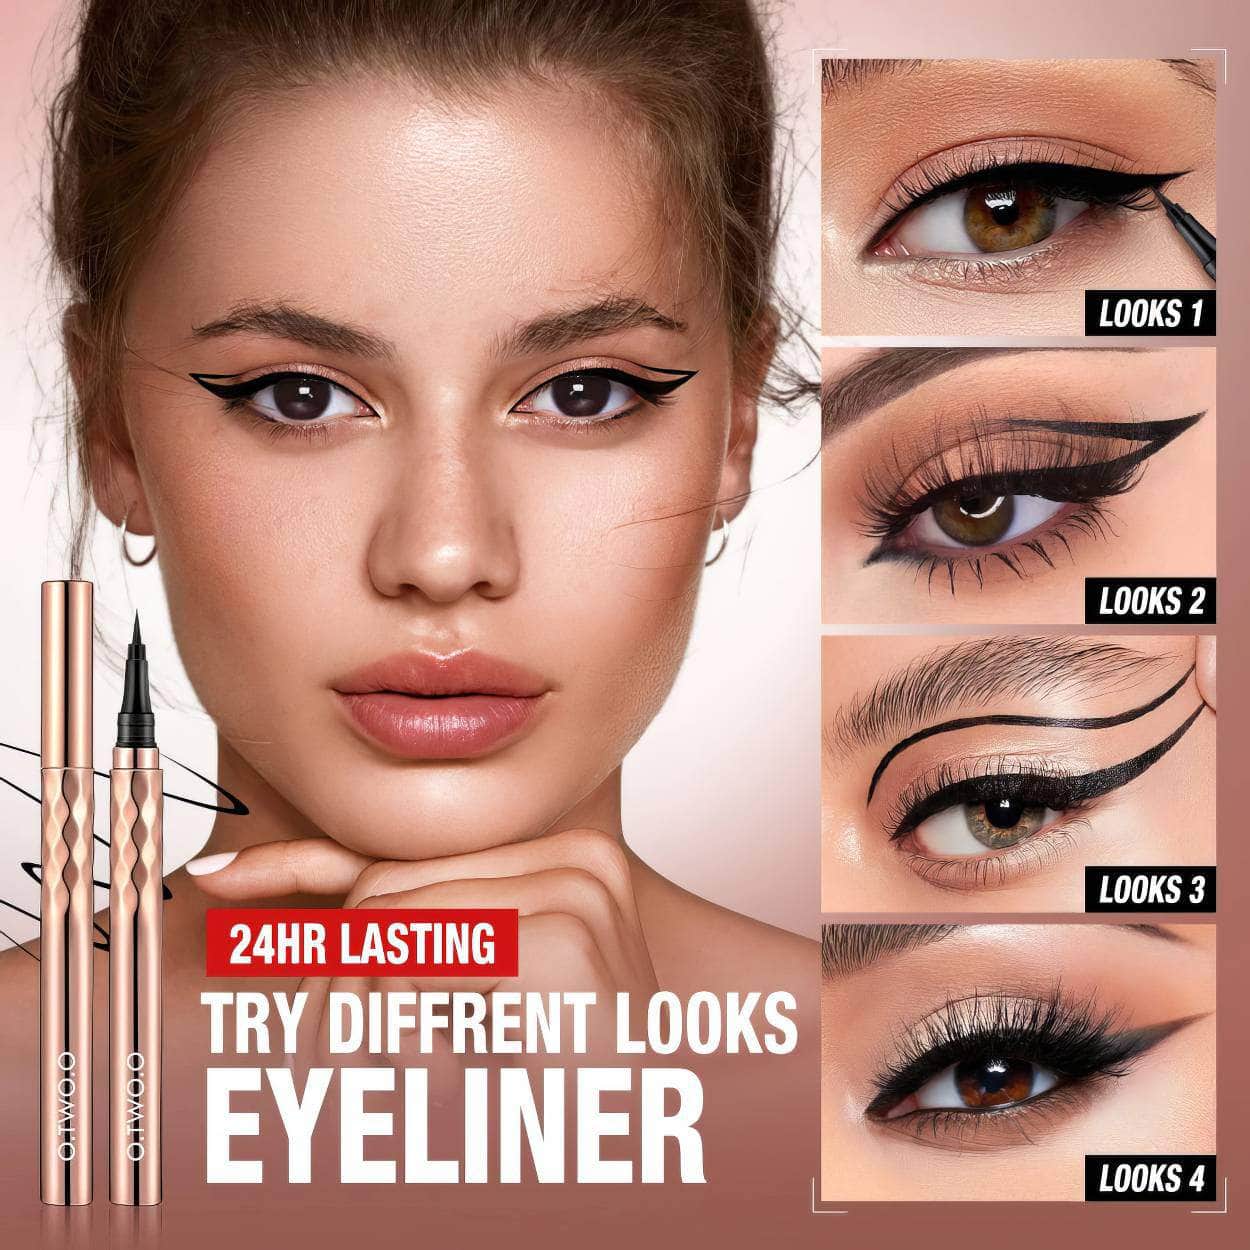 O.TWO.O Eyeliner: Pencil & Liquid, Waterproof, Smudge Proof, Quick Drying - 12-Hour Wear, Ultra Fine Black for Arrows